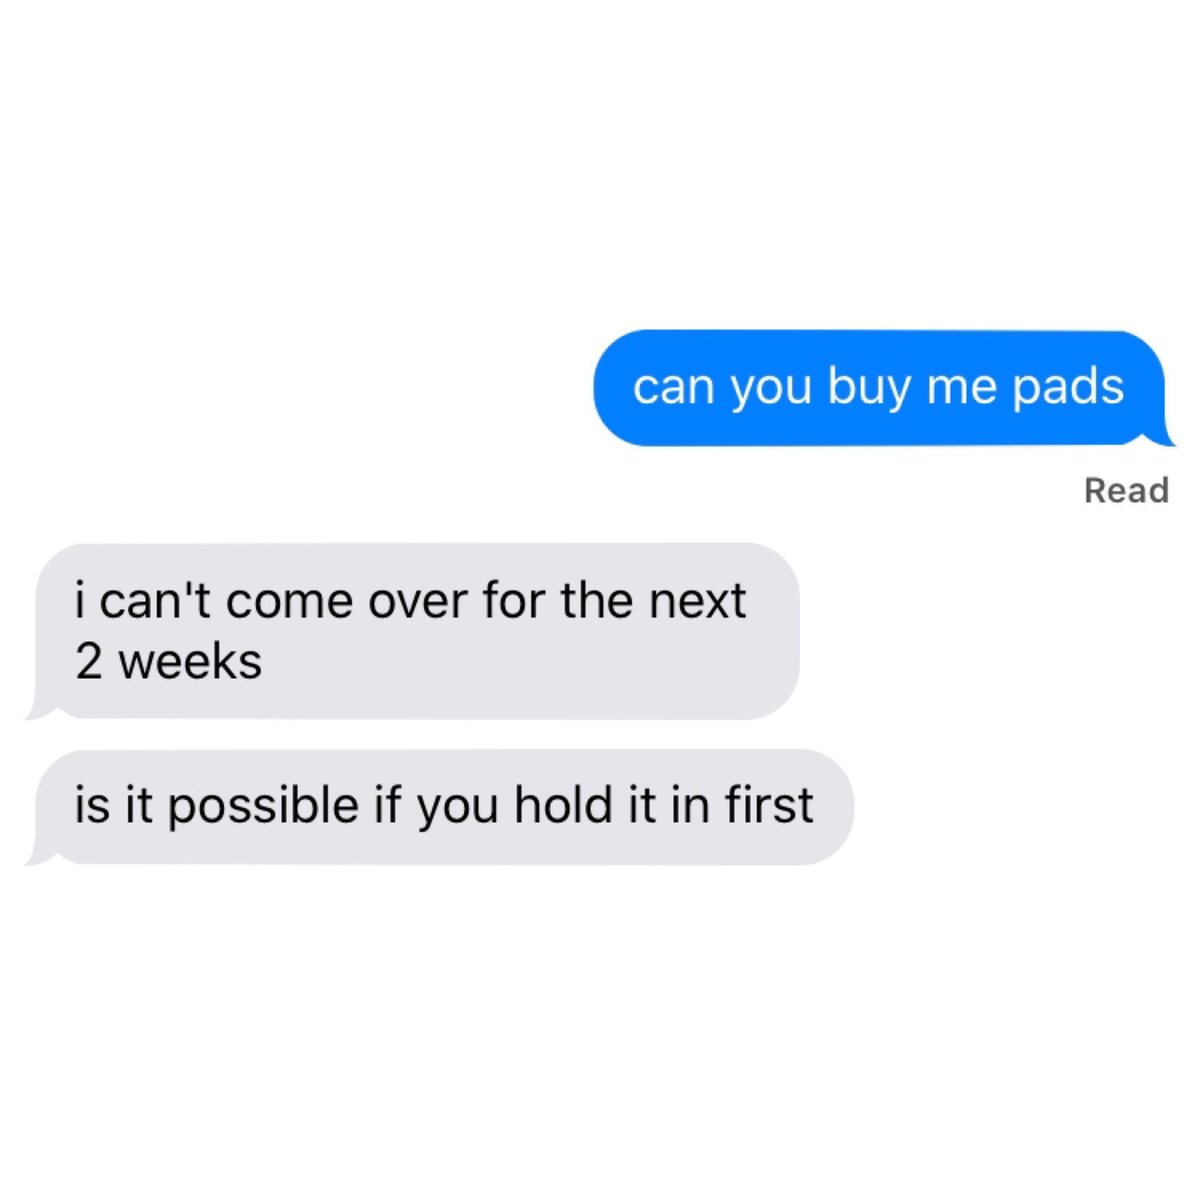 A3 Characters Responses to “Can You Buy Me Pads”: A Thread